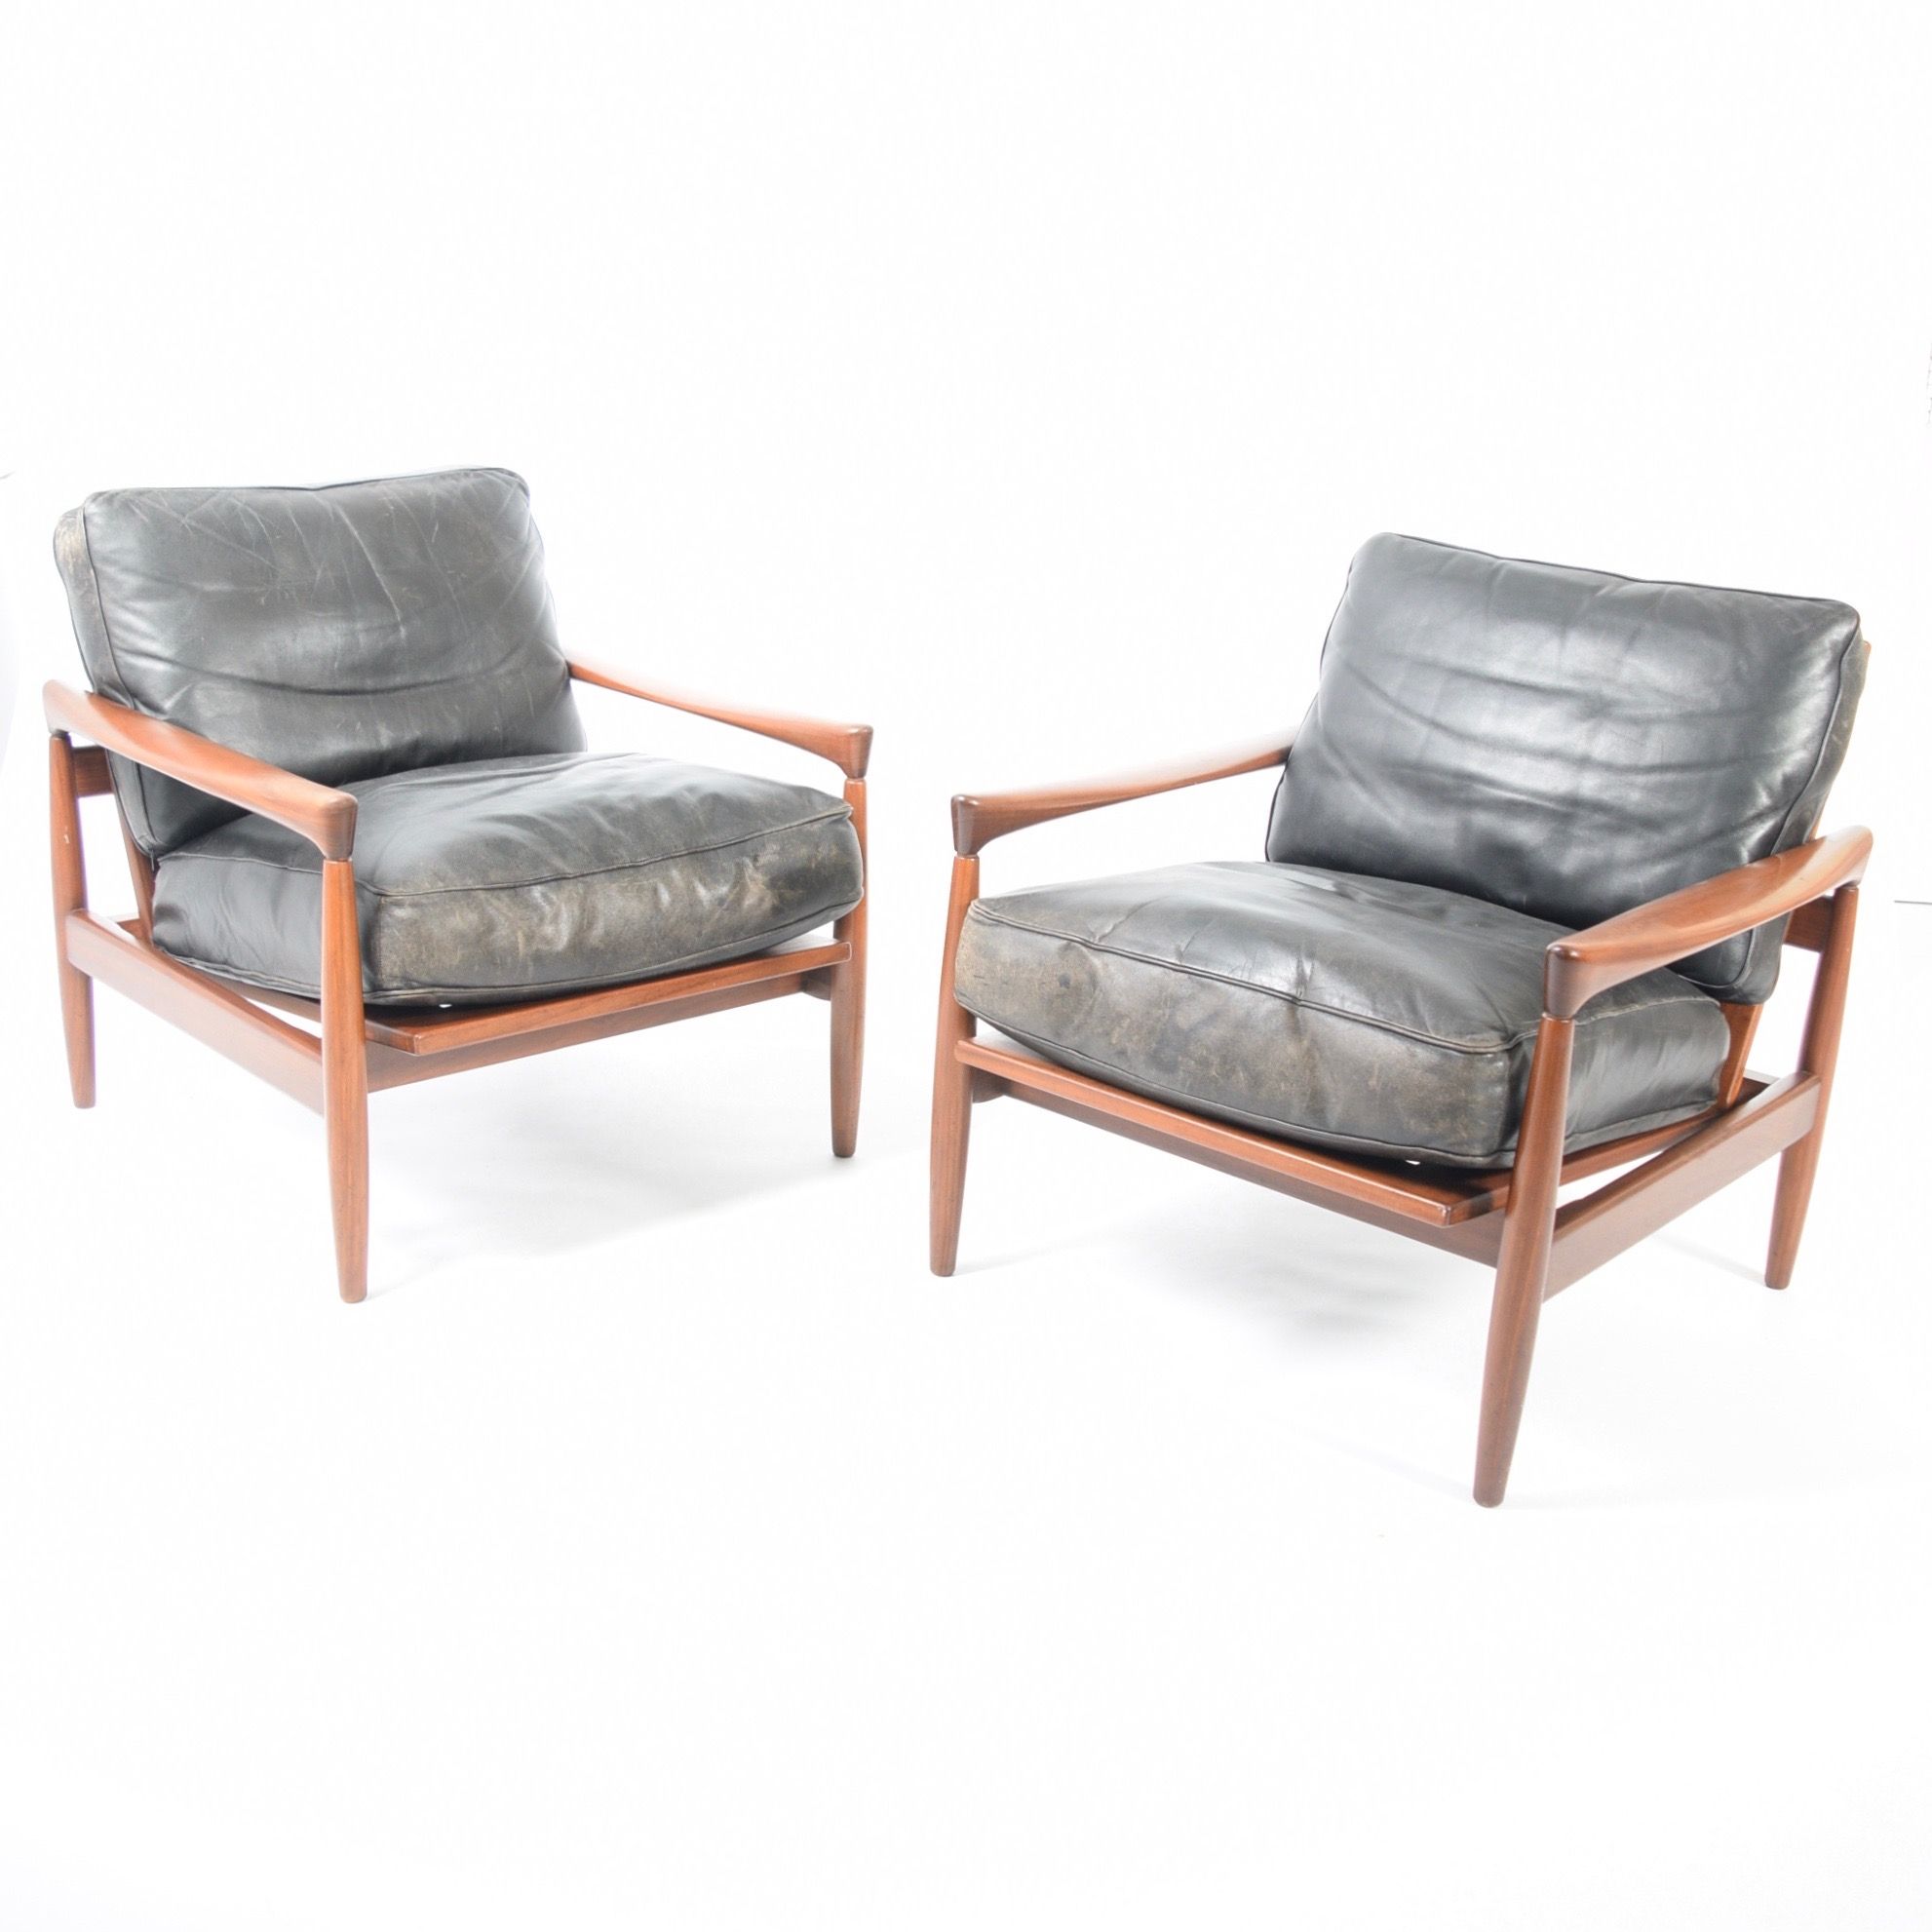 Banc Osier Best Of Pair Of Kolding Lounge Chairs by Erik W¸rts for Ikea 1960s